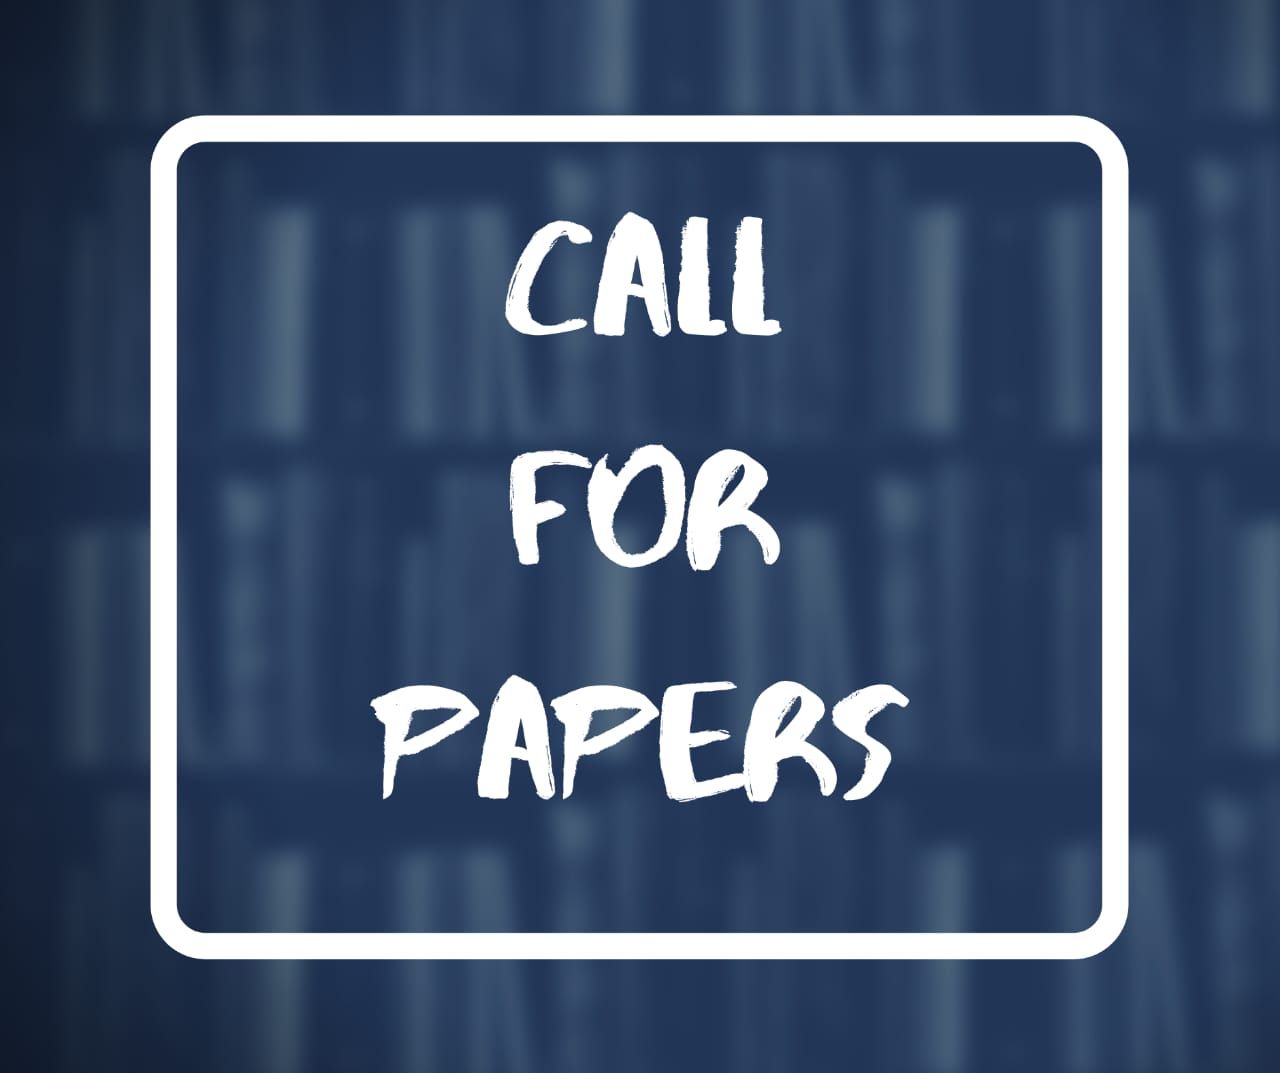 CALL FOR PAPERS: LEXCELLENCE – TNDALU E-JOURNAL VOLUME 1 ISSUE 2